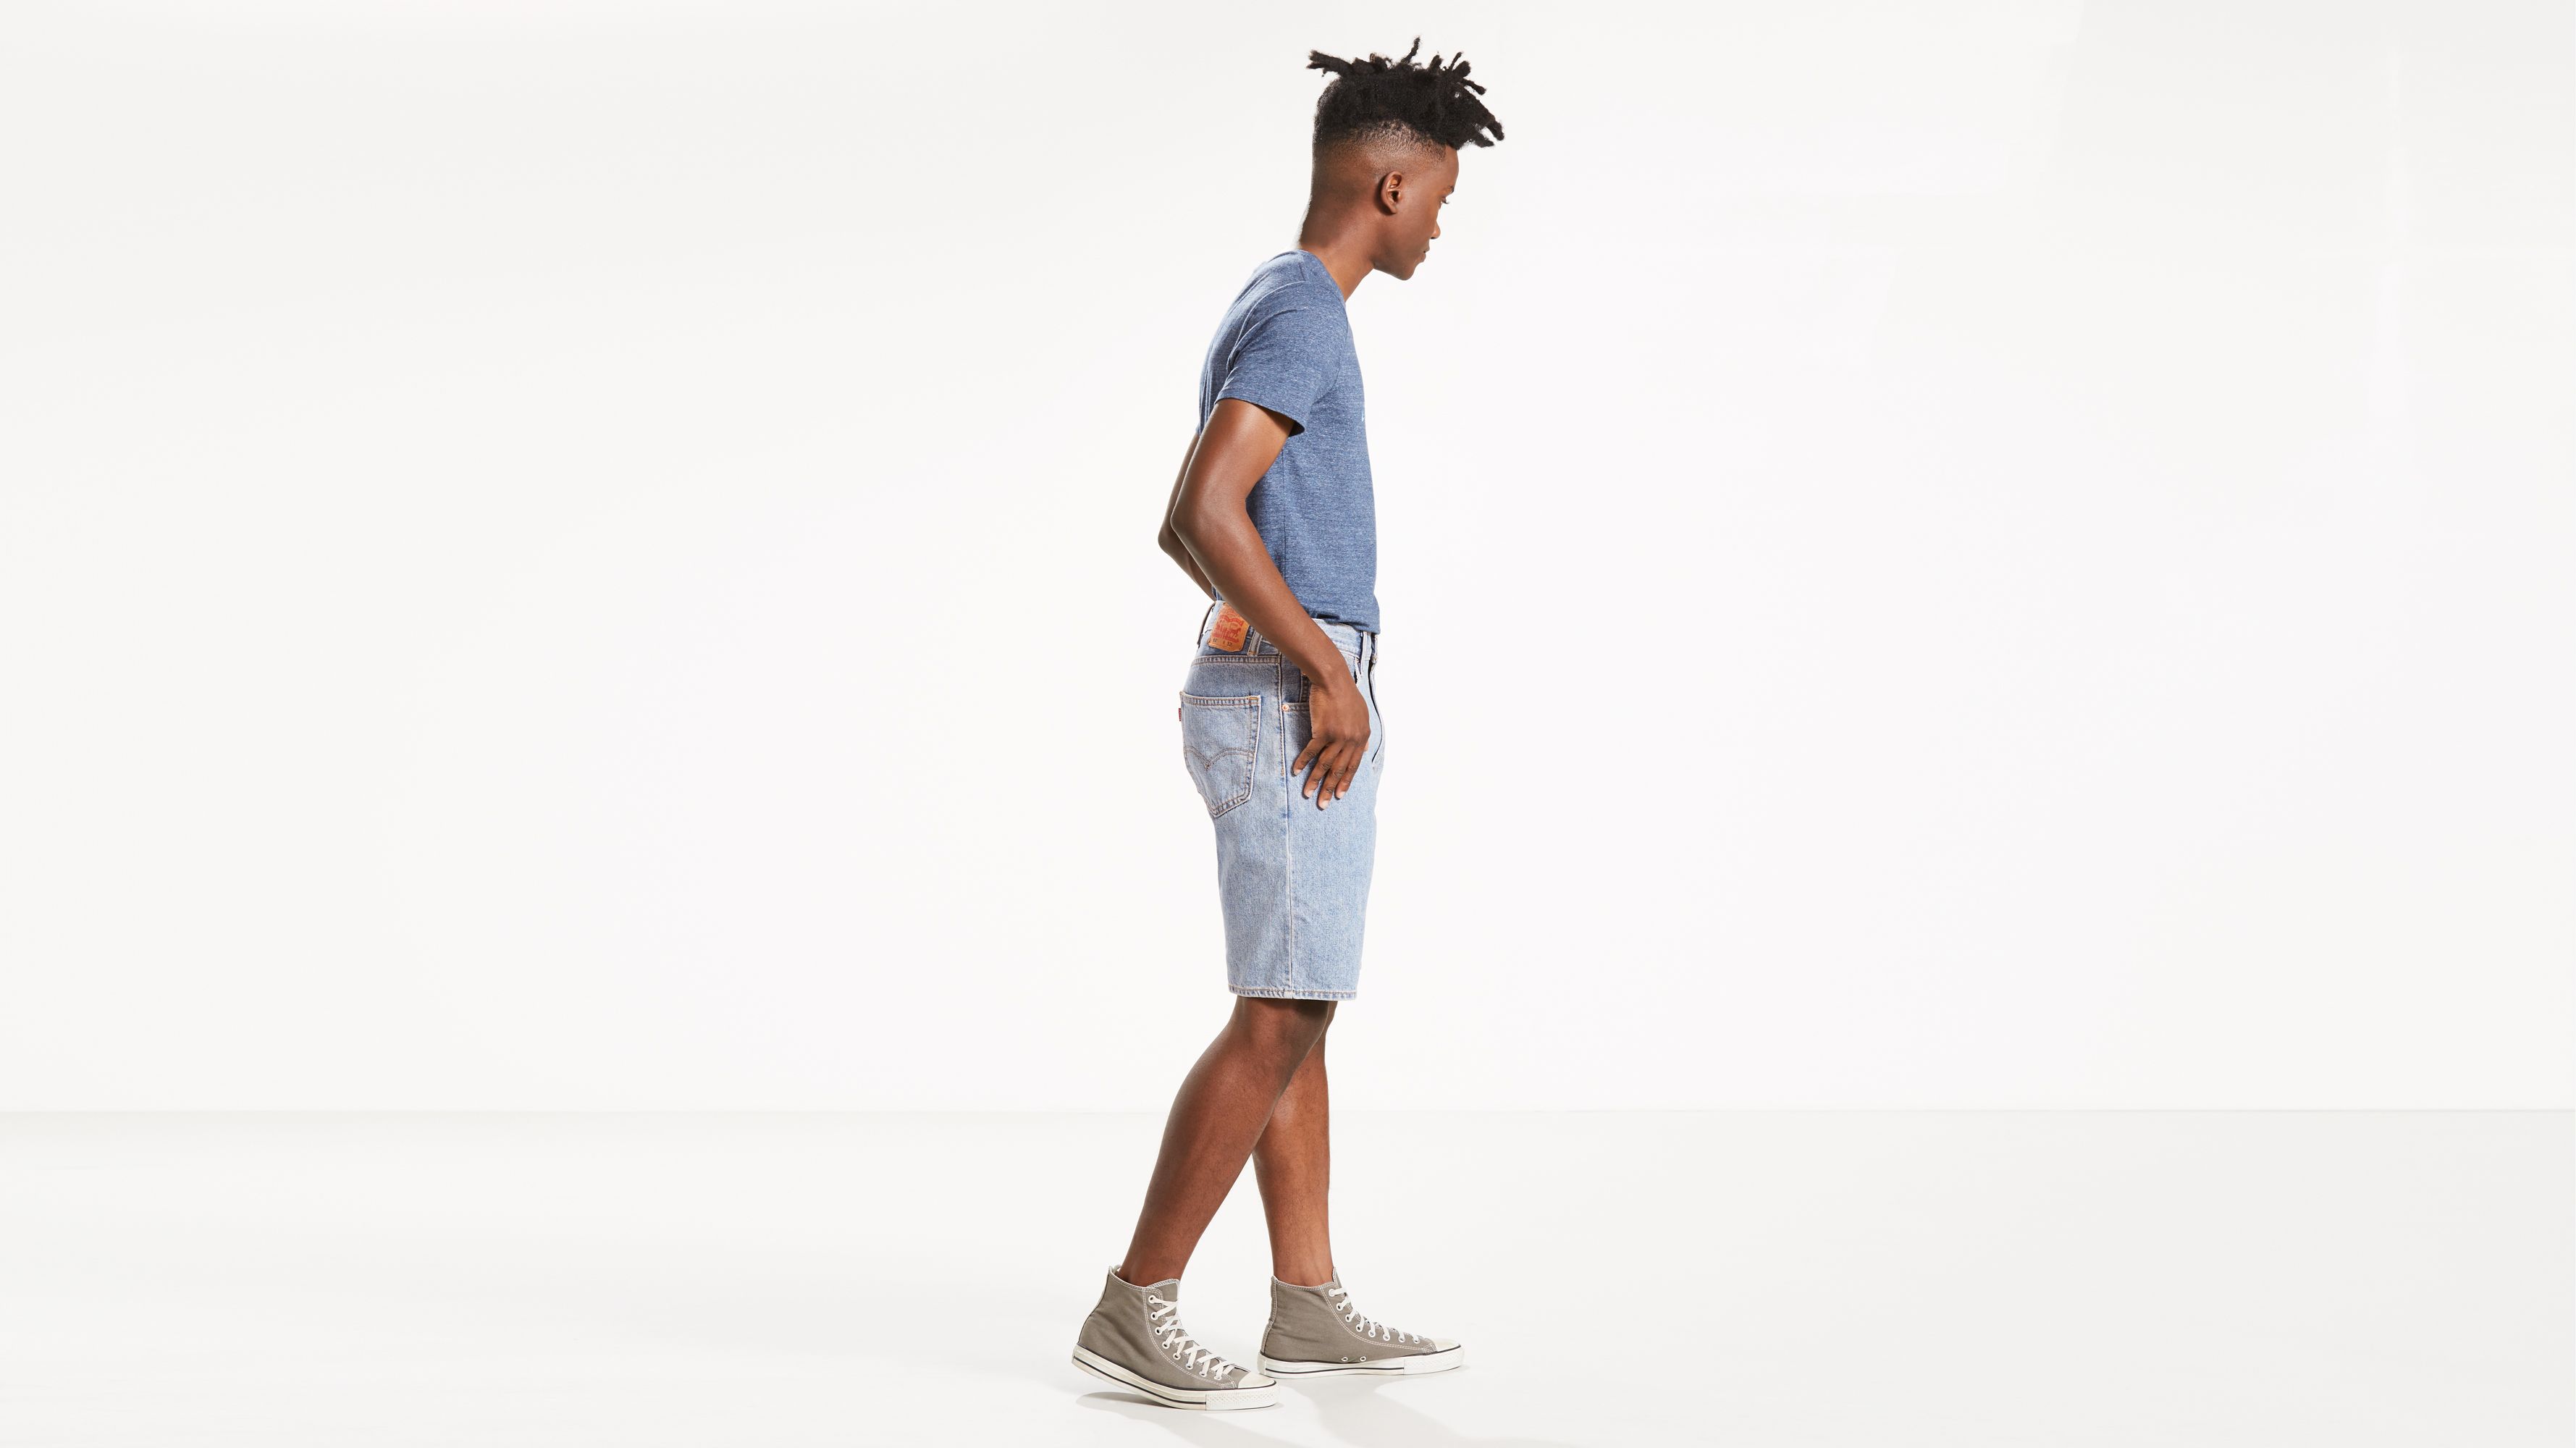 550™ Relaxed Fit Shorts - Light Wash | Levi's® US